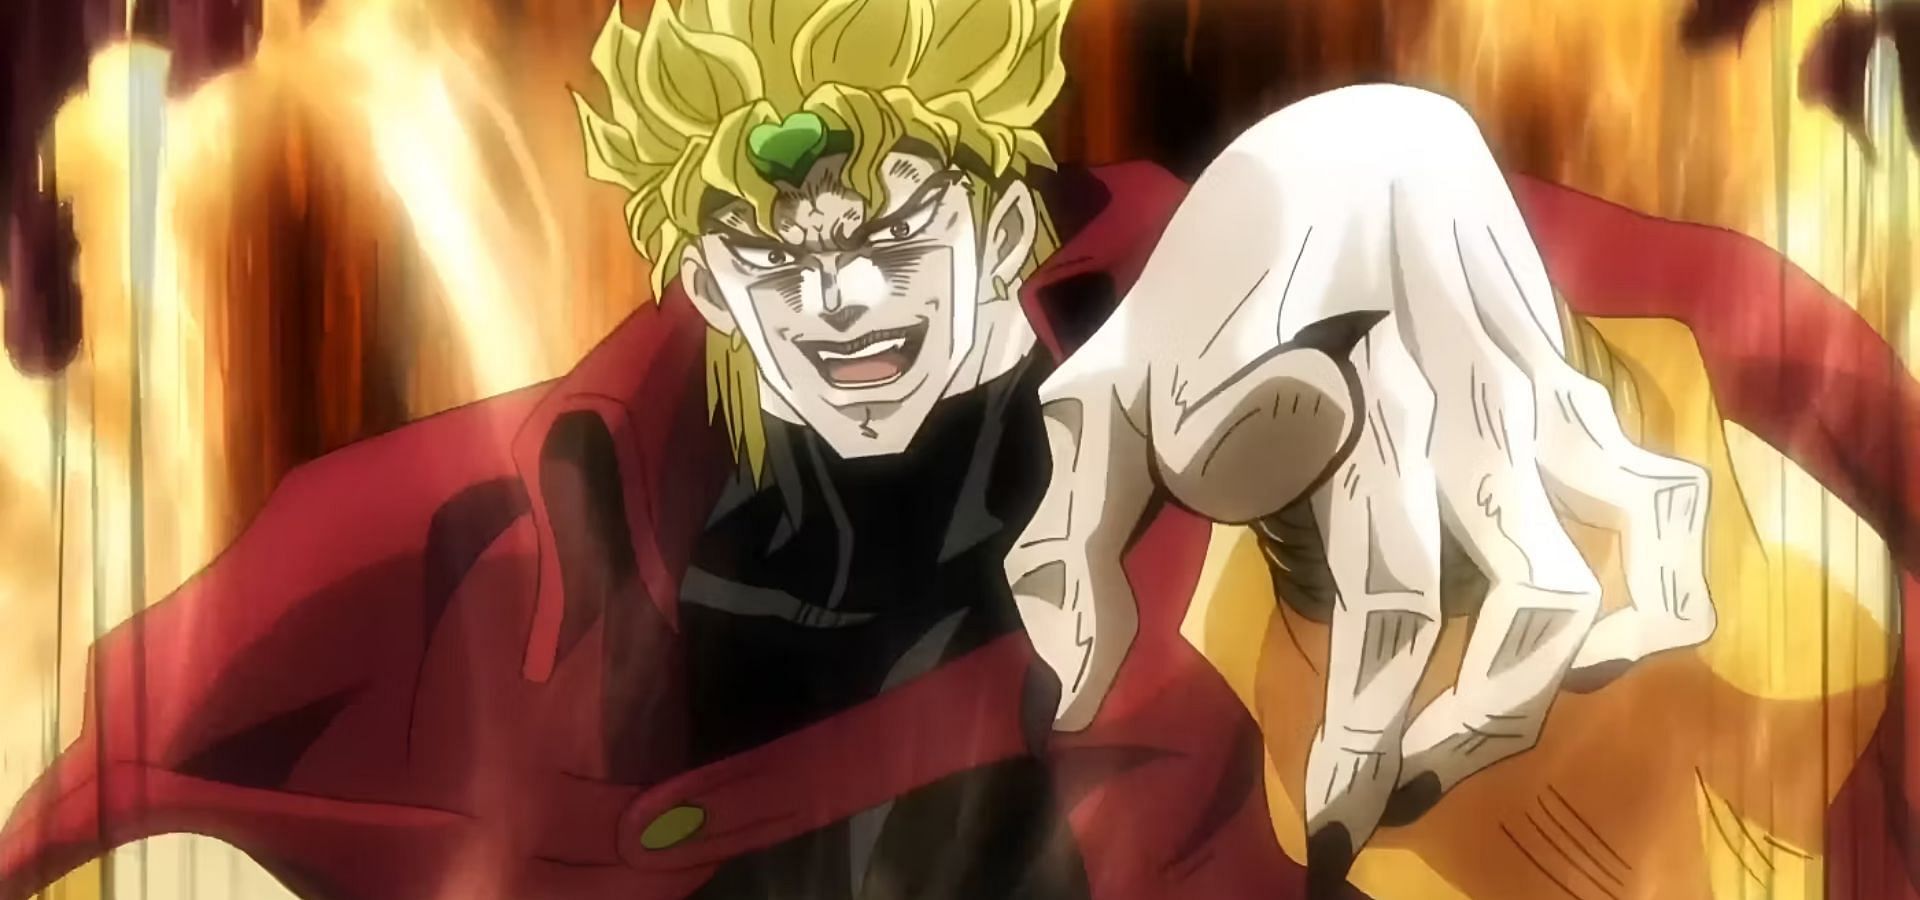 DIO as seen in anime (Image via David Production)